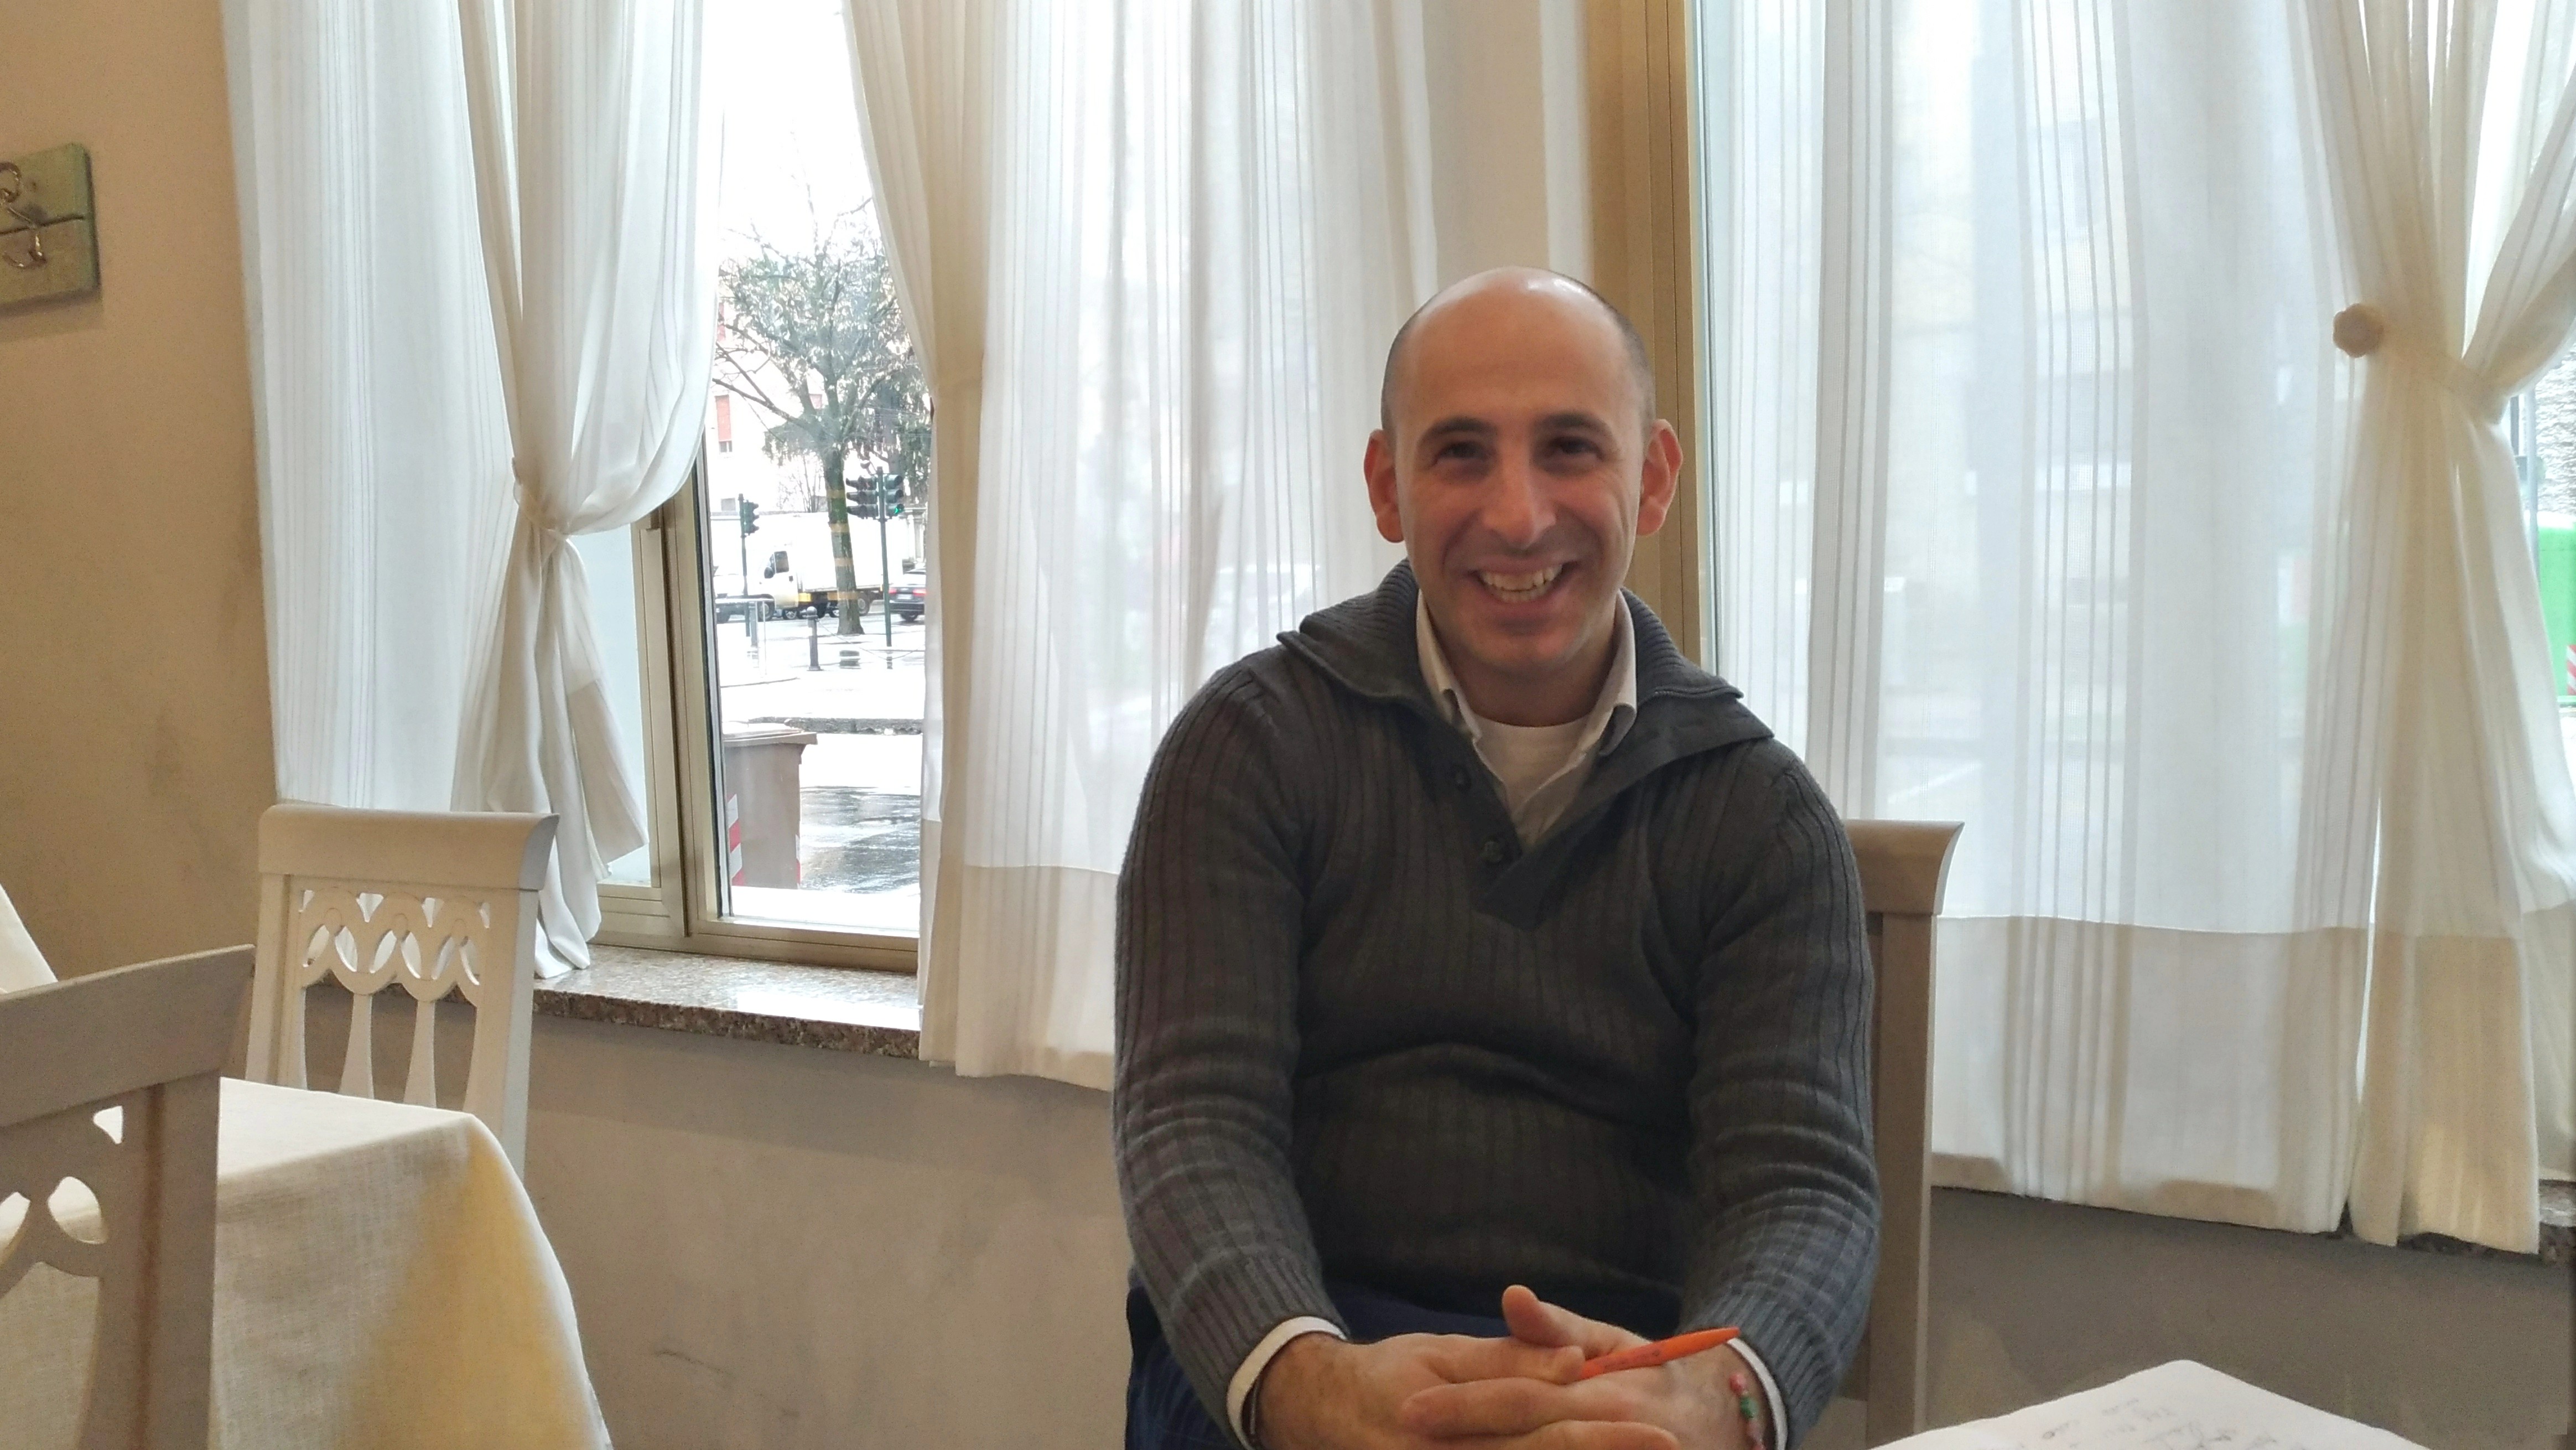 Salvatore Buonocore: the Networker who makes the dream of the Blue moon in Parma